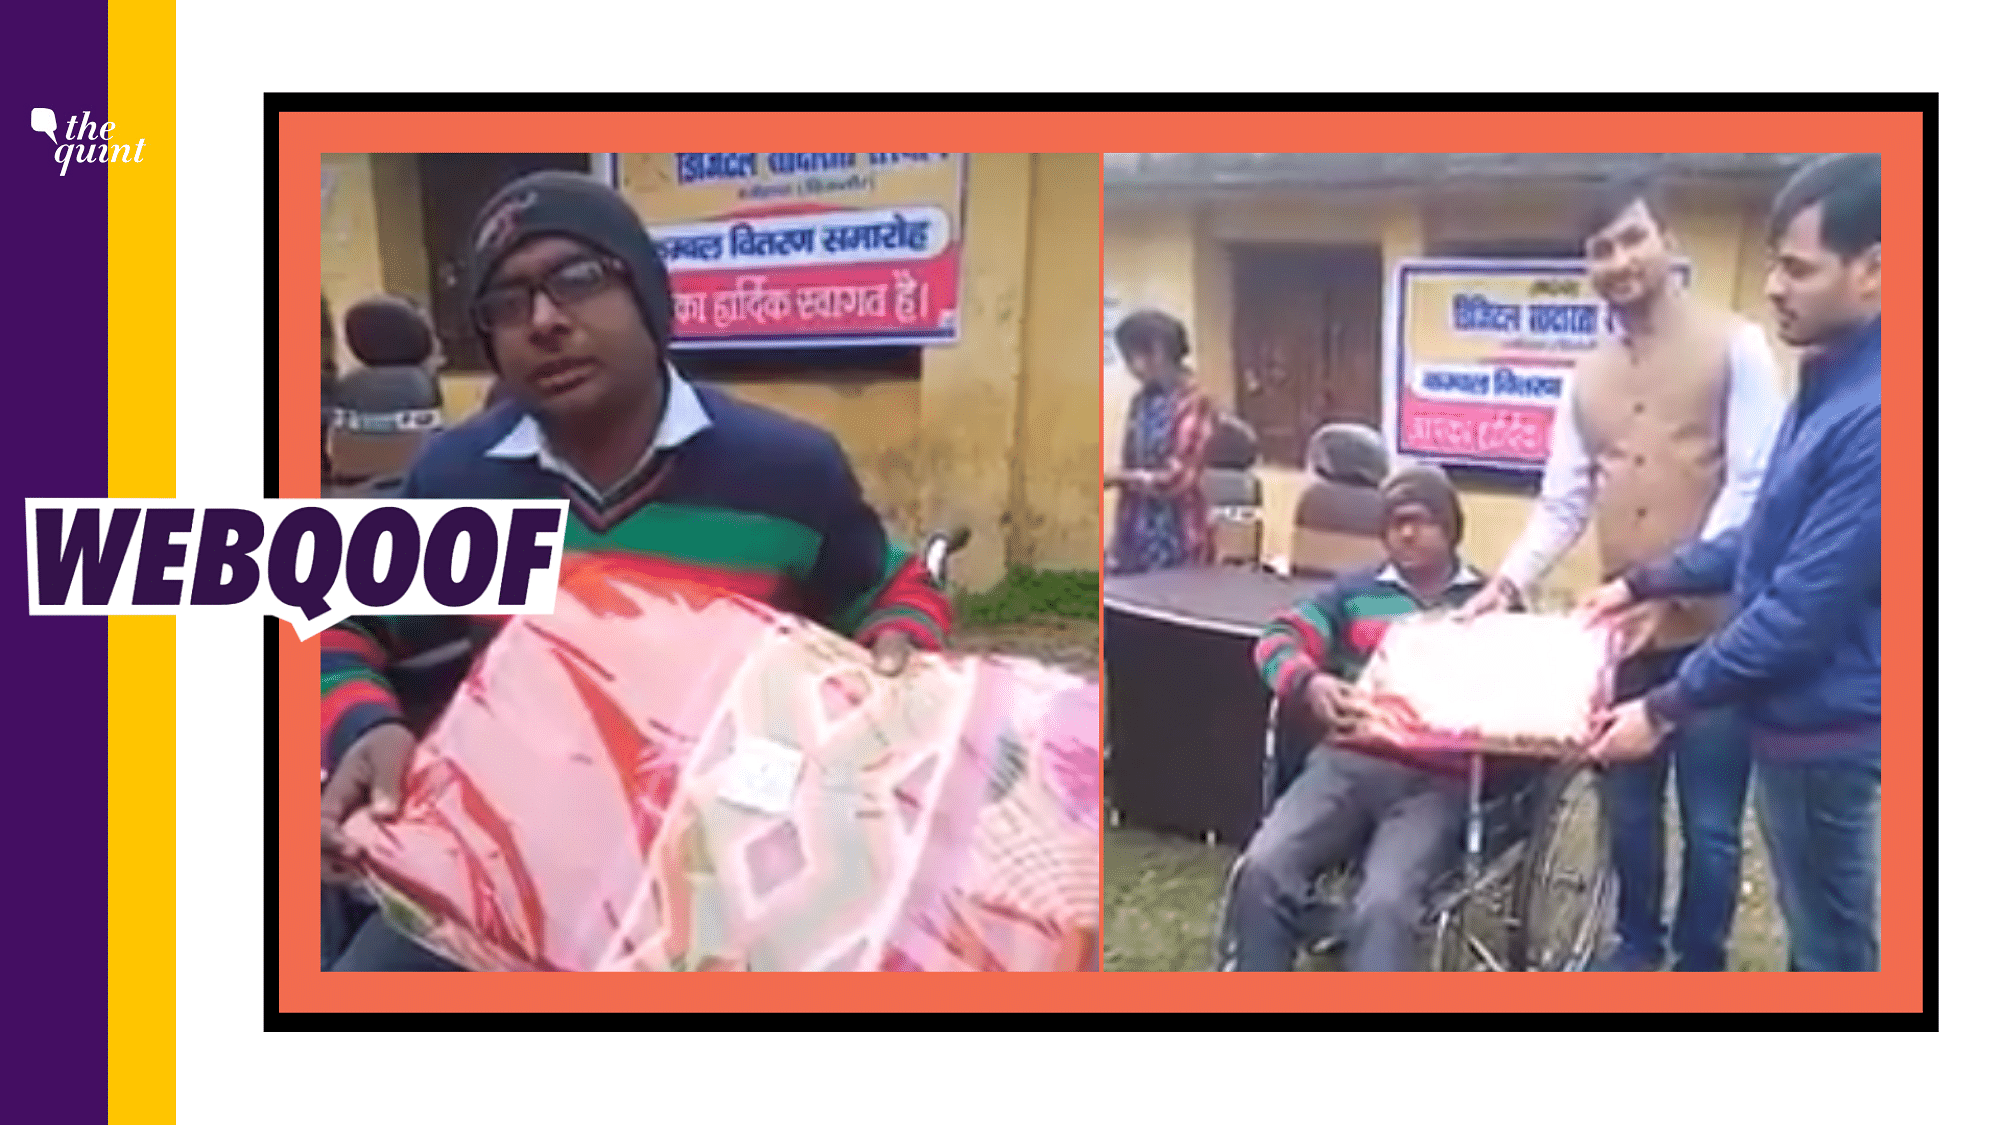 A viral video has falsely claimed that Aam Aadmi Party (AAP) distributed “magic blankets” to the differently abled.